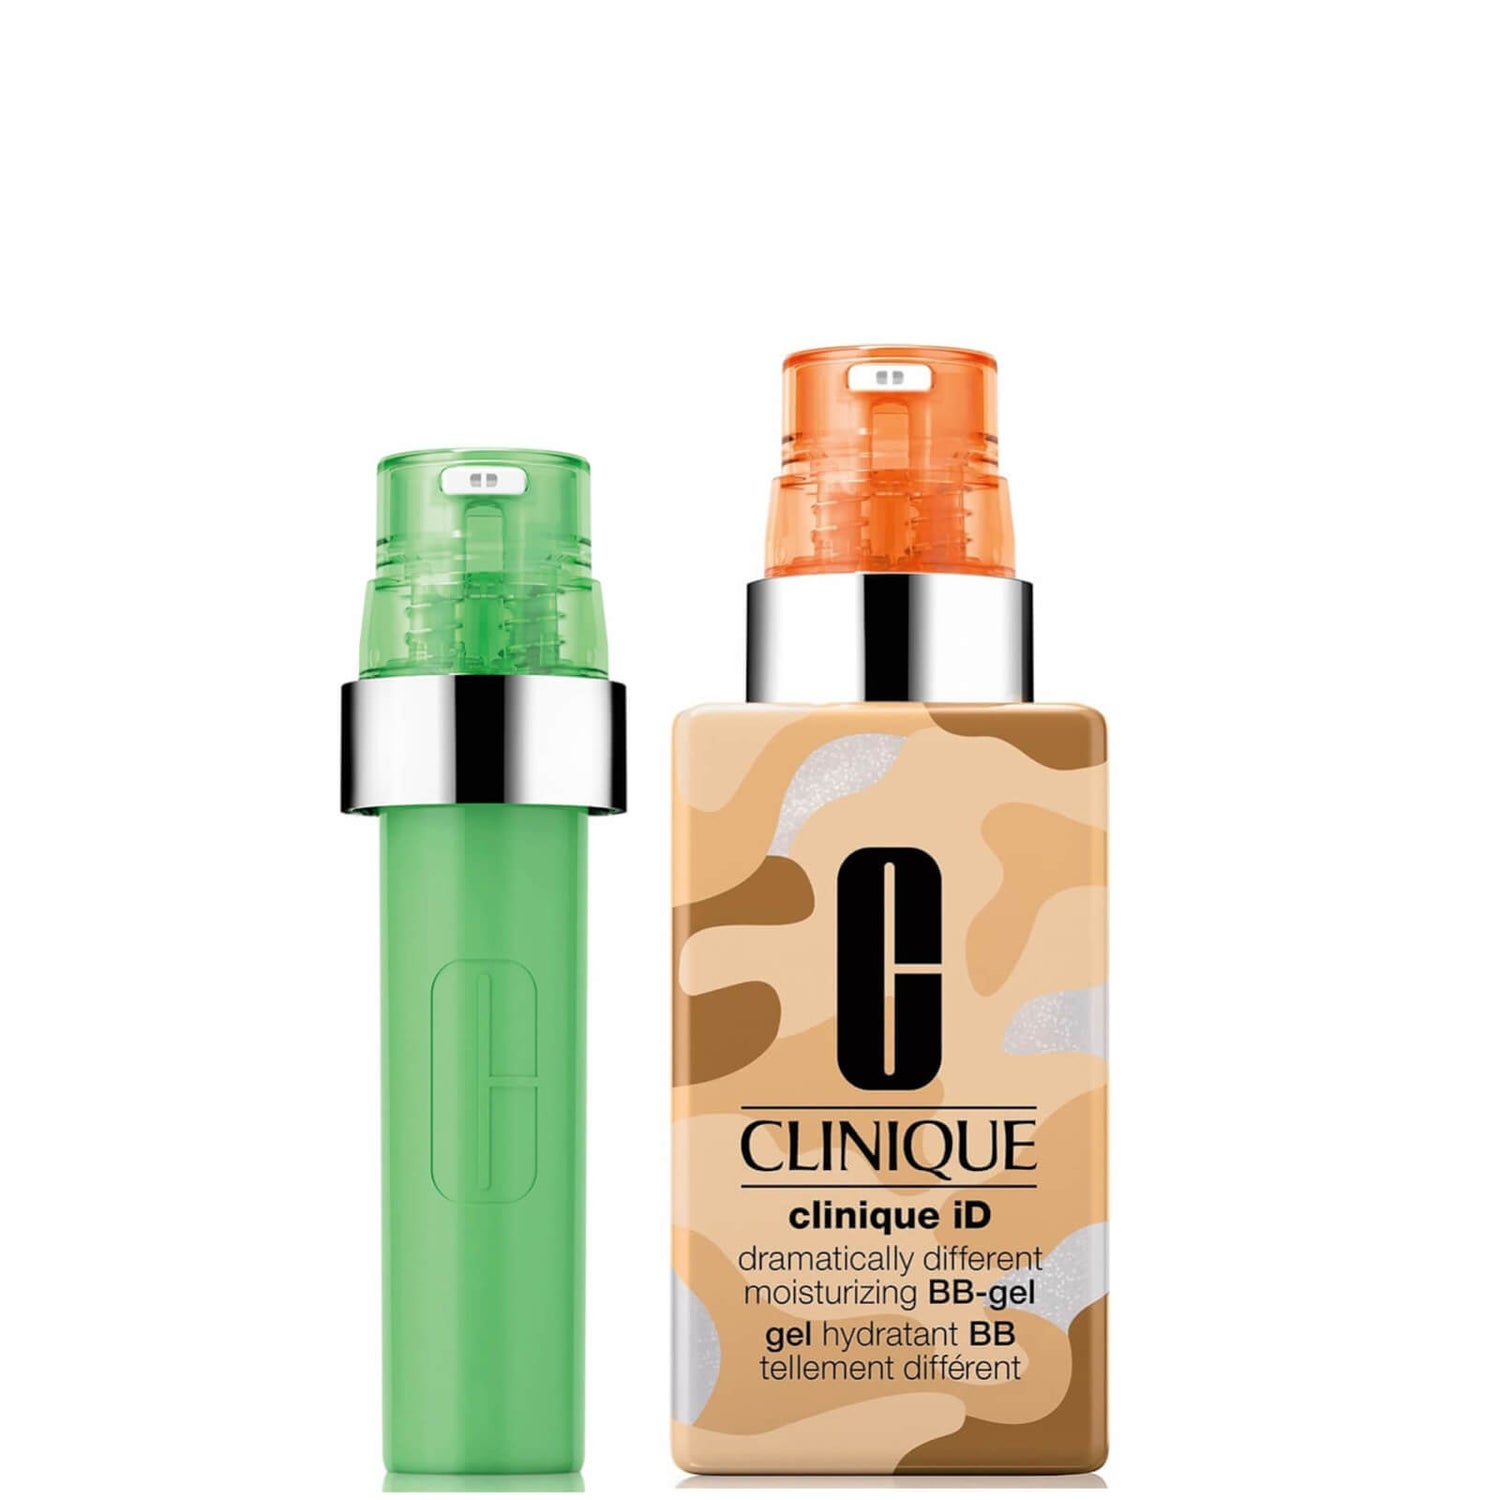 Clinique iD Dramatically Different Moisturising BB-Gel und Active Cartridge Concentrate for Irritation Bundle